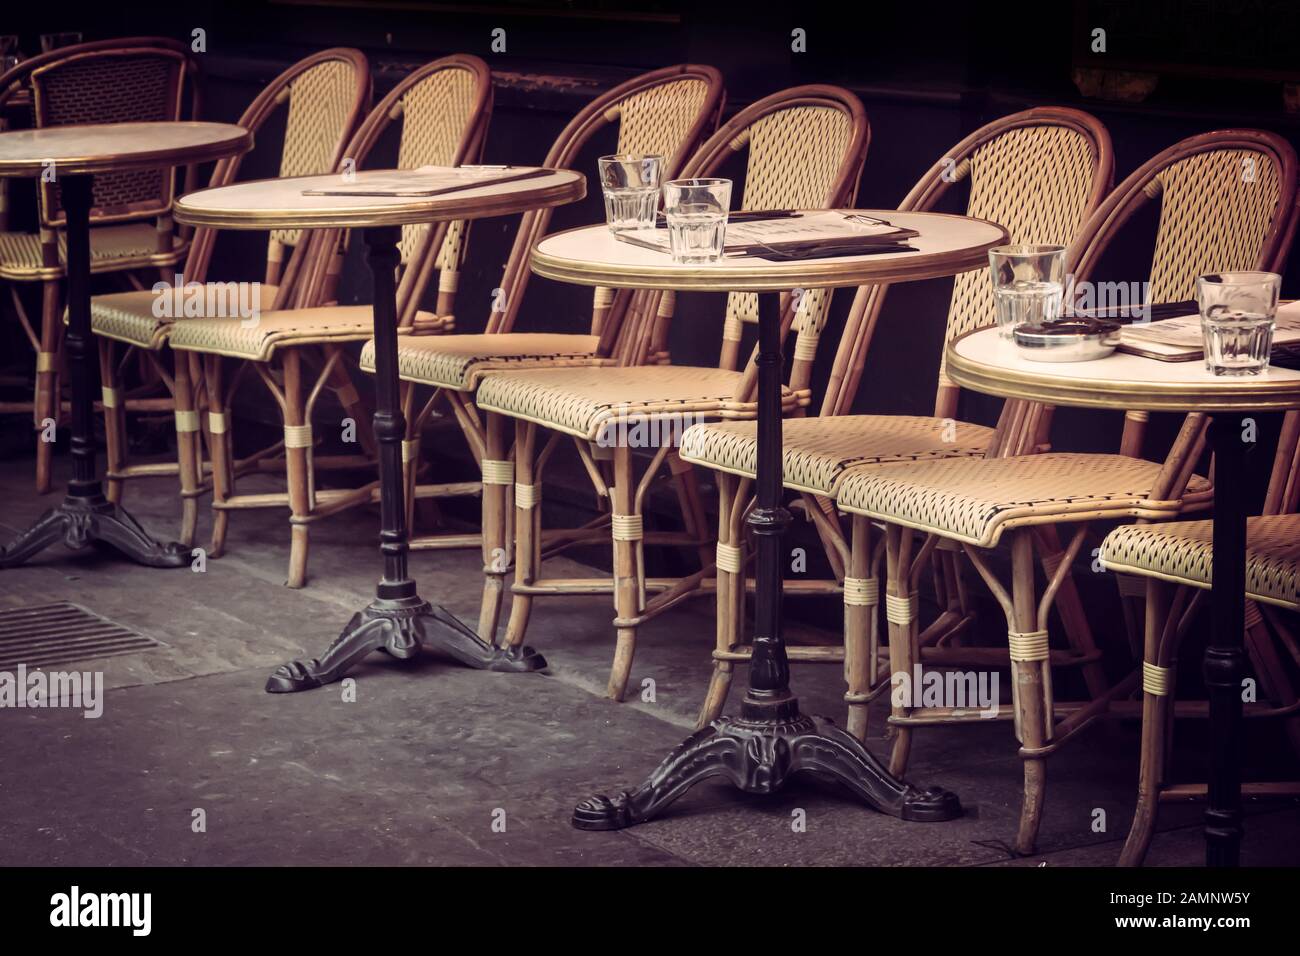 Empty retro tables and chairs on a outdoor cafe terrace in Paris, France Stock Photo